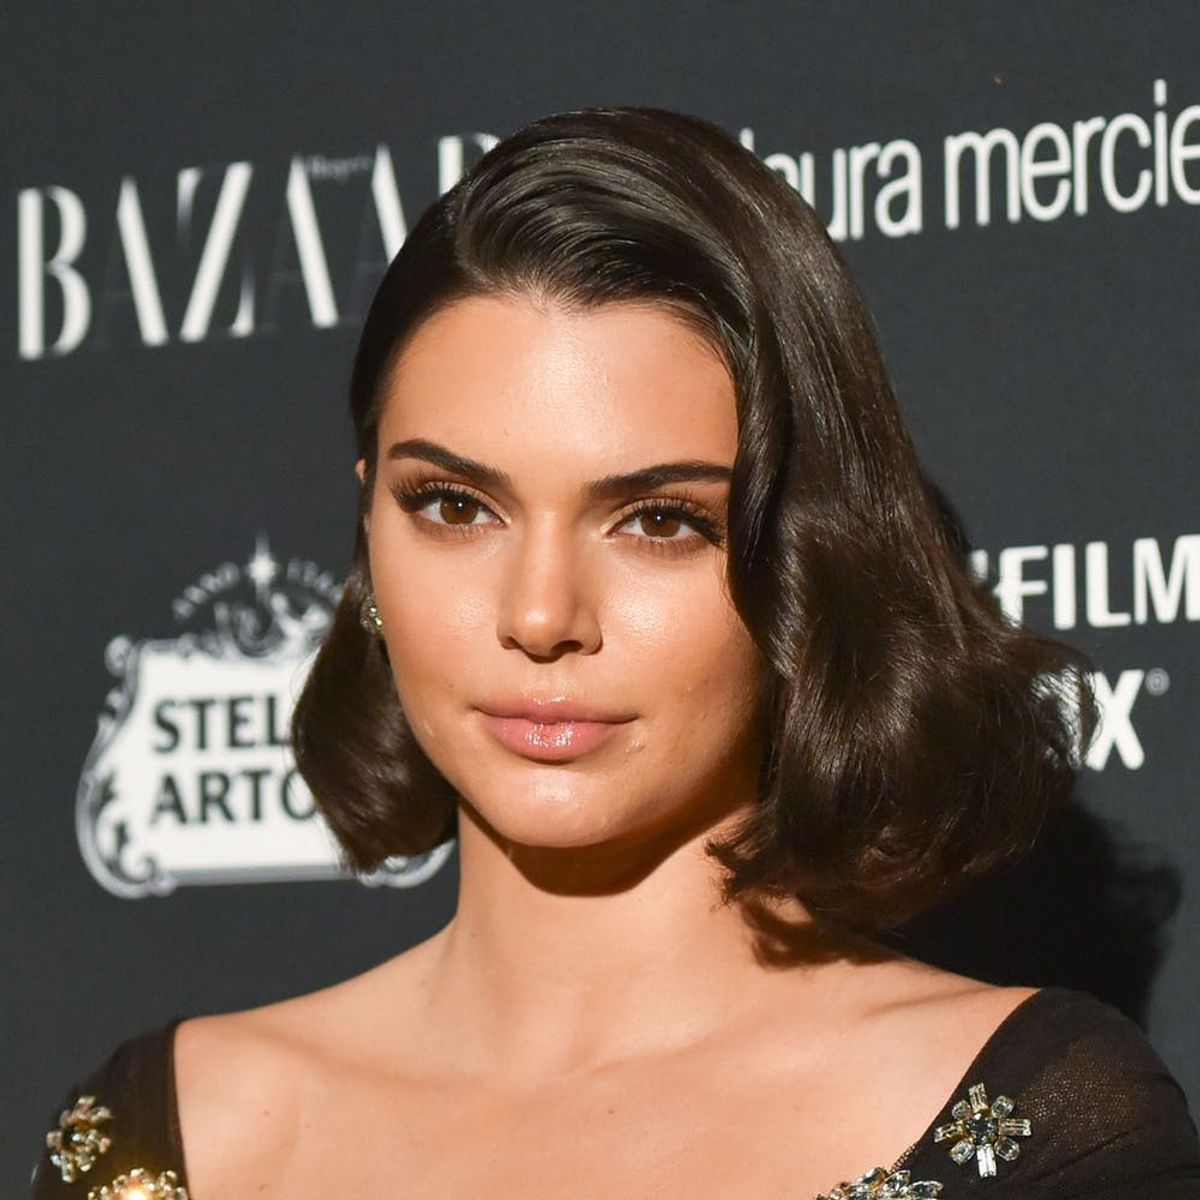 Not Everyone Is Happy With Kendall Jenner’s “Fashion of the Decade” Award Win: Here’s Why